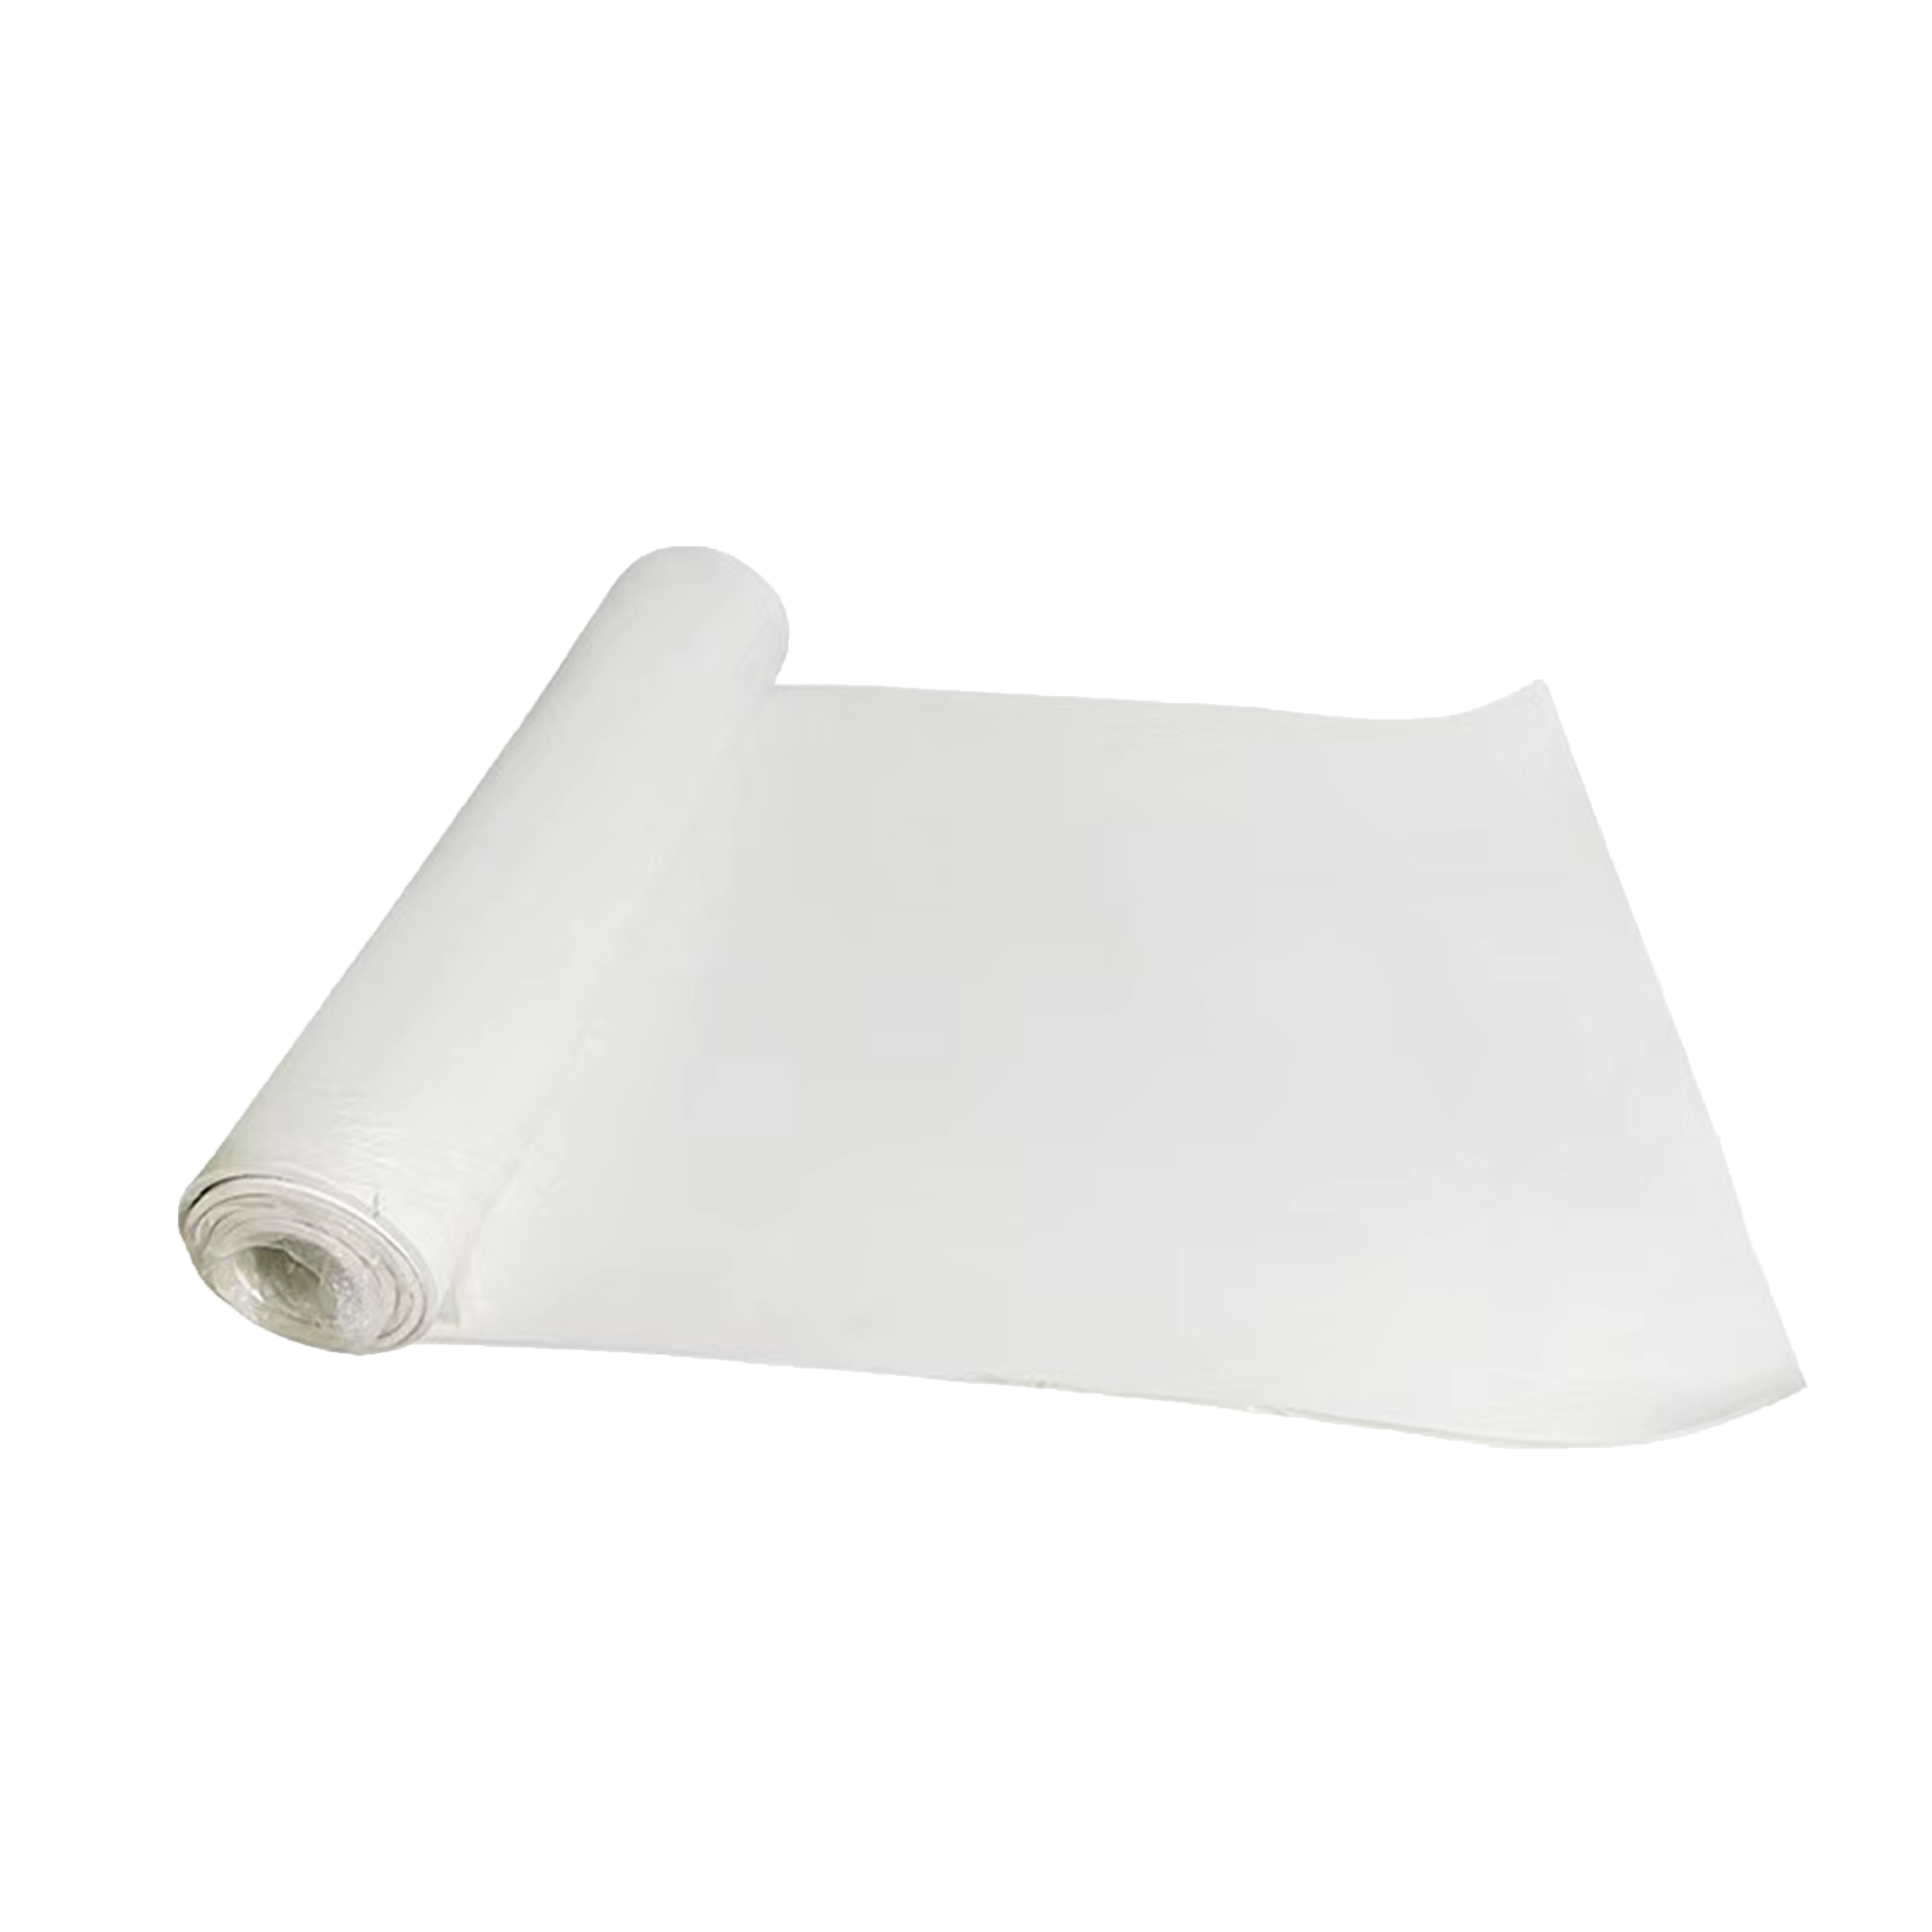 High Performance Heat Resistant 0.5-200mm Thickness Silicone Rubber Sheet